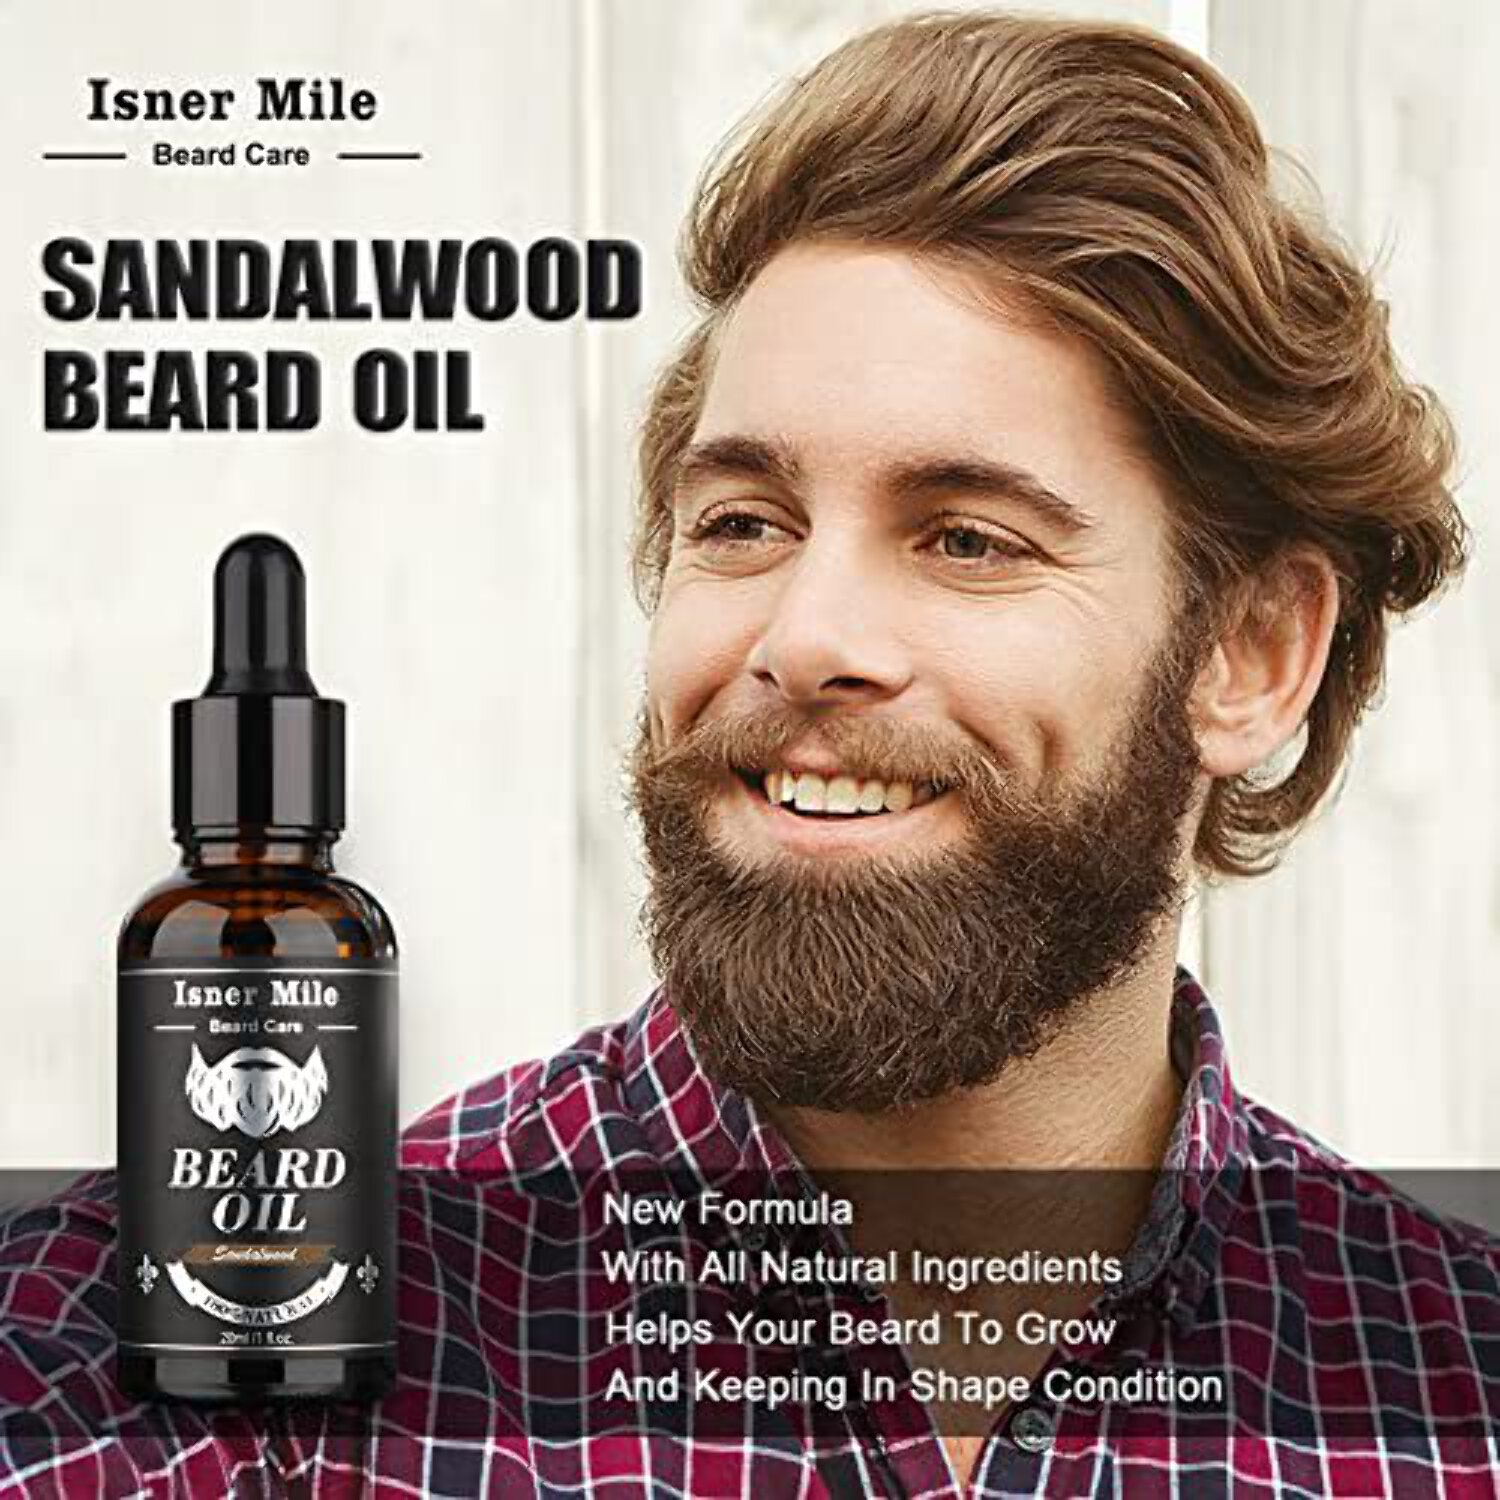 Isner Mile Beard Kit for Men, Grooming  Trimming Tool Complete Set with Shampoo Wash, Beard Care Oil, Balm, Brush, Comb, Scissors  Storage Bag, Perfect Gifts for Him Man Dad Father Boyfriend - image 5 of 7